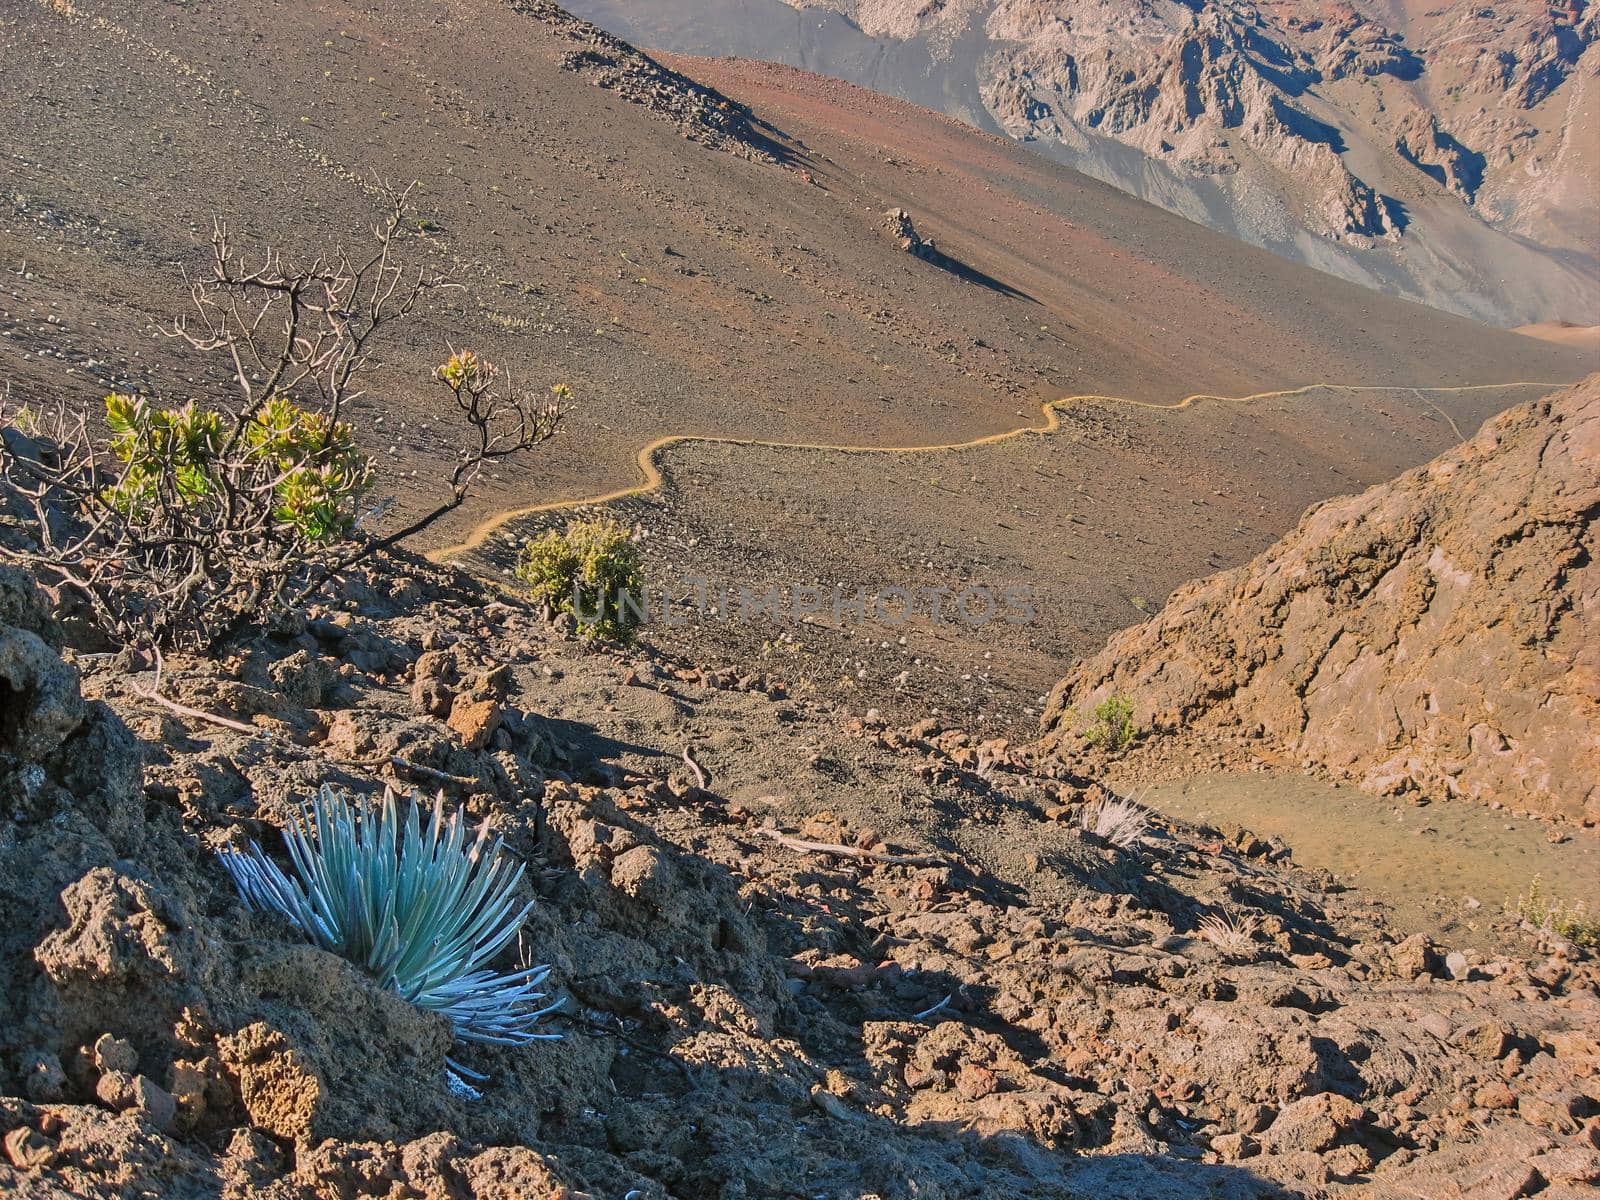 Haleakala Silversword with Hiking Trail in Background leading down from summit by markvandam